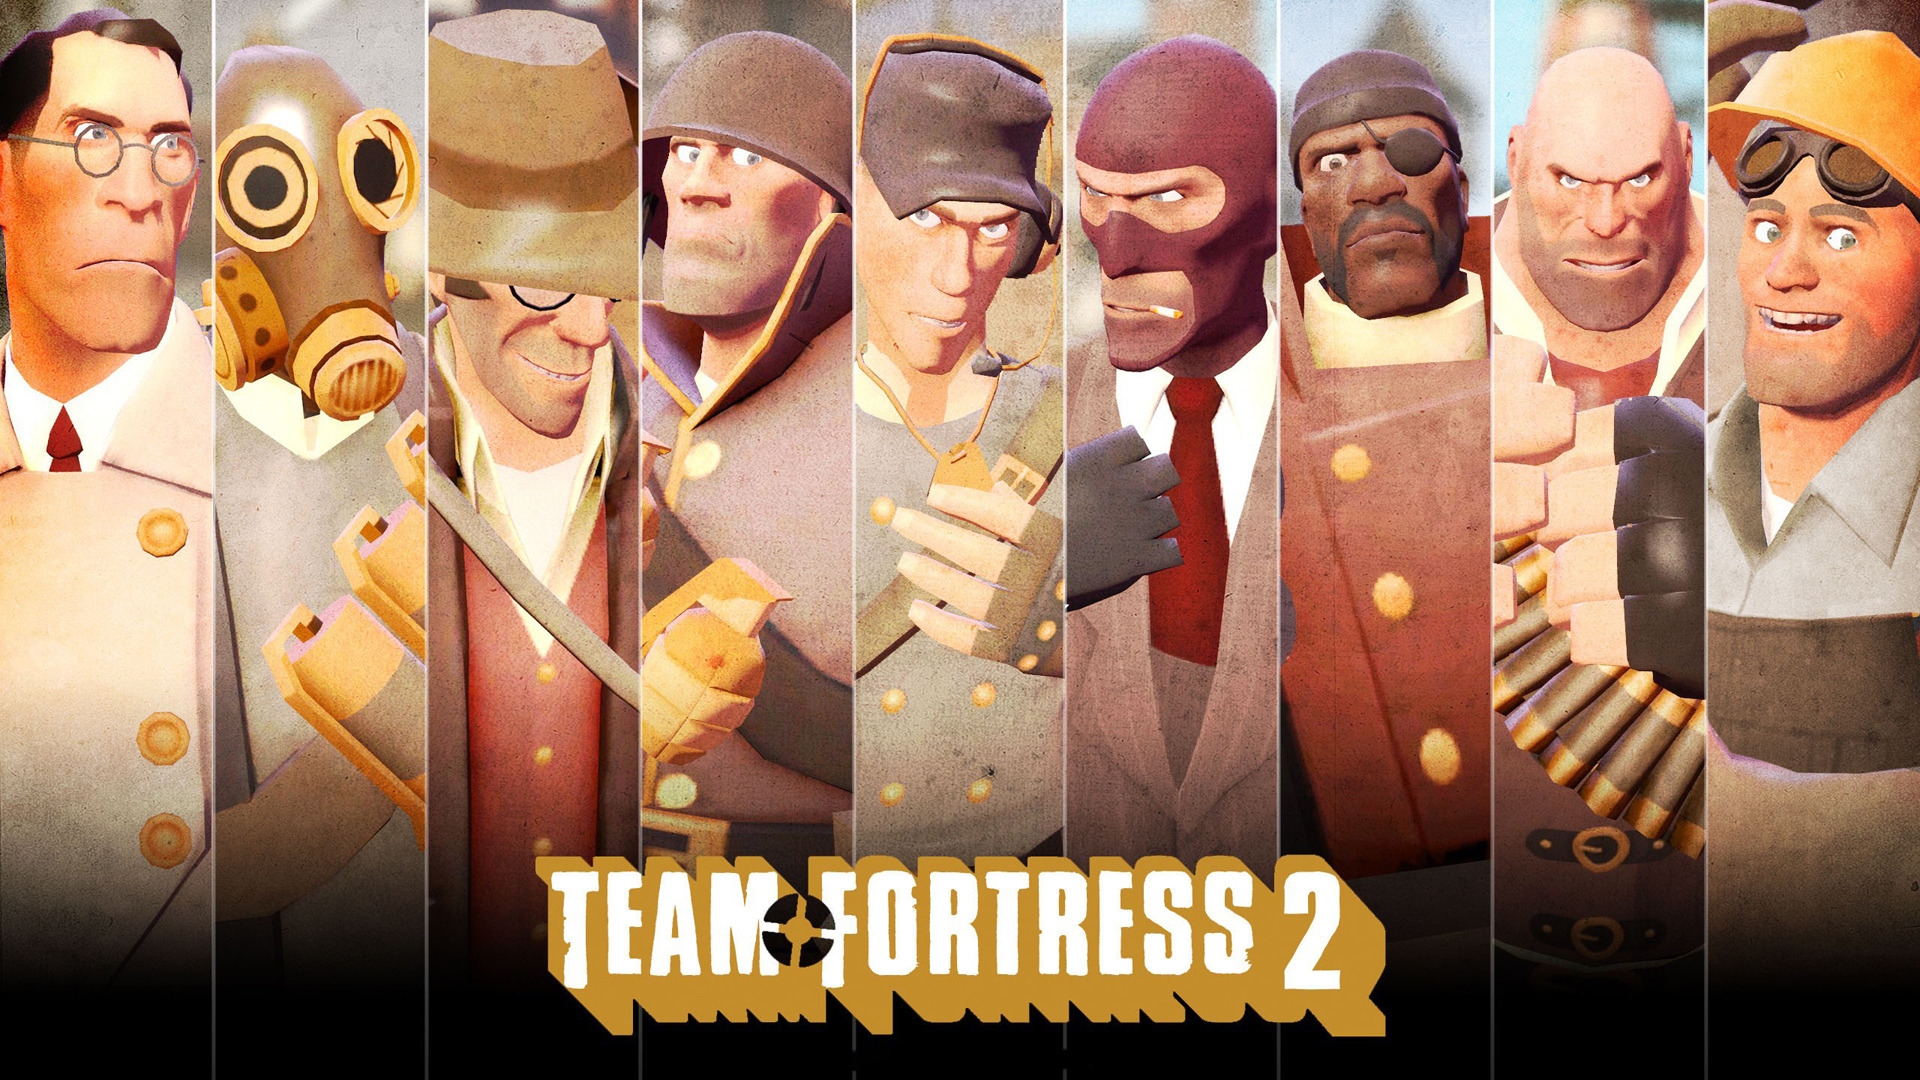 Team Fortress 2 for 1920 x 1080 HDTV 1080p resolution